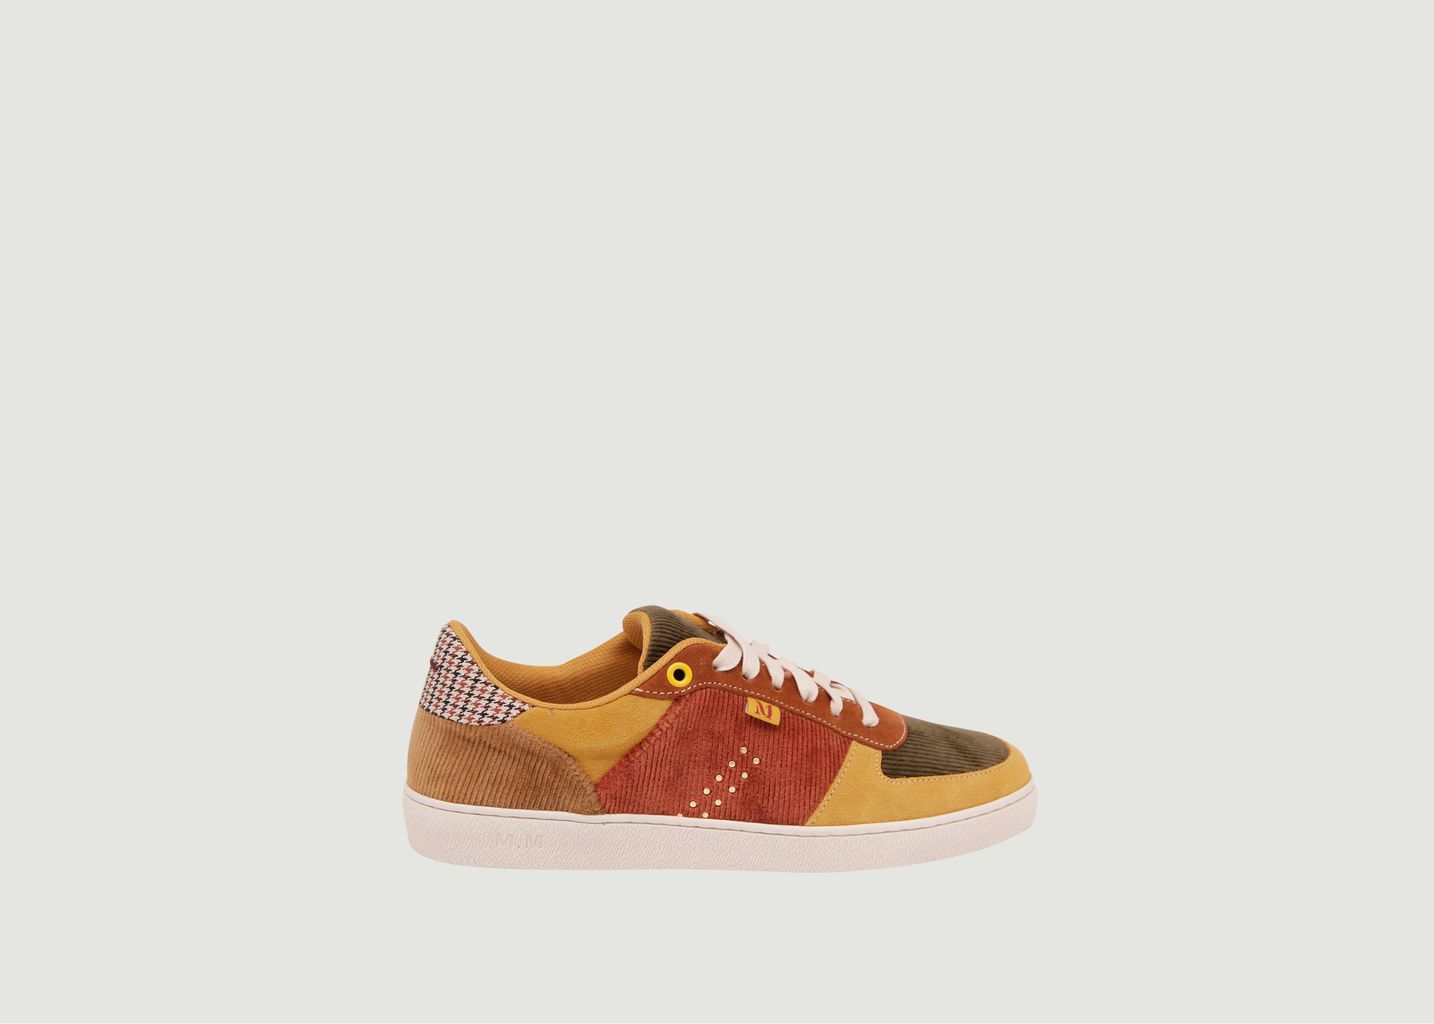 Marie corduroy and suede leather low sneakers - M.Moustache